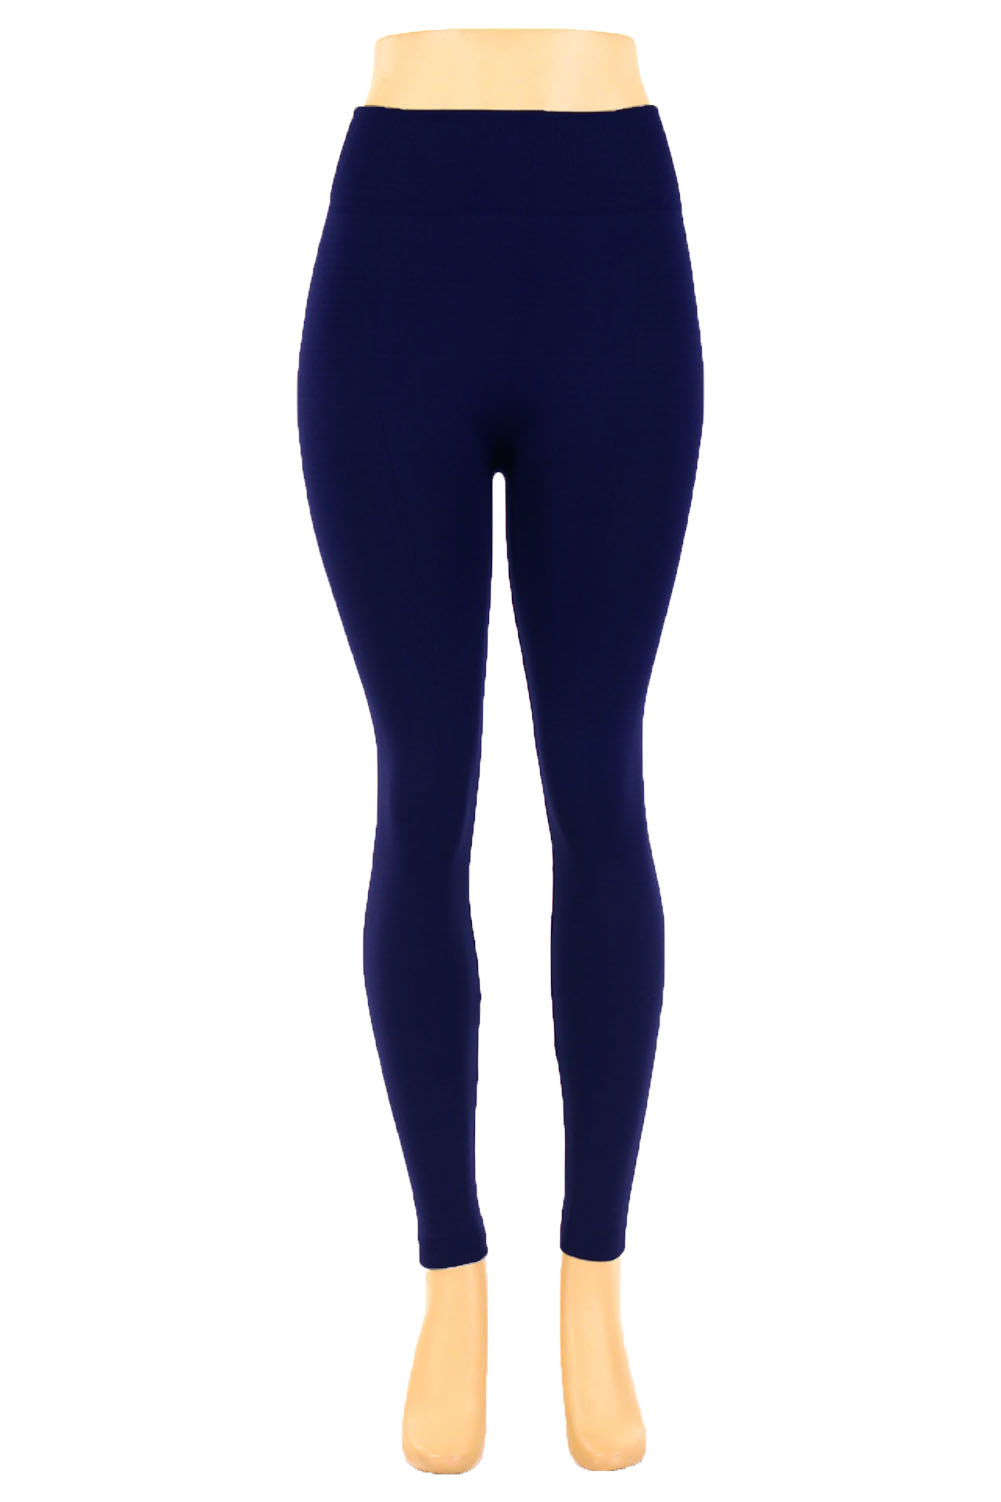 ATTRACO Thermal Fleece Lined Leggings Women High Waisted Winter